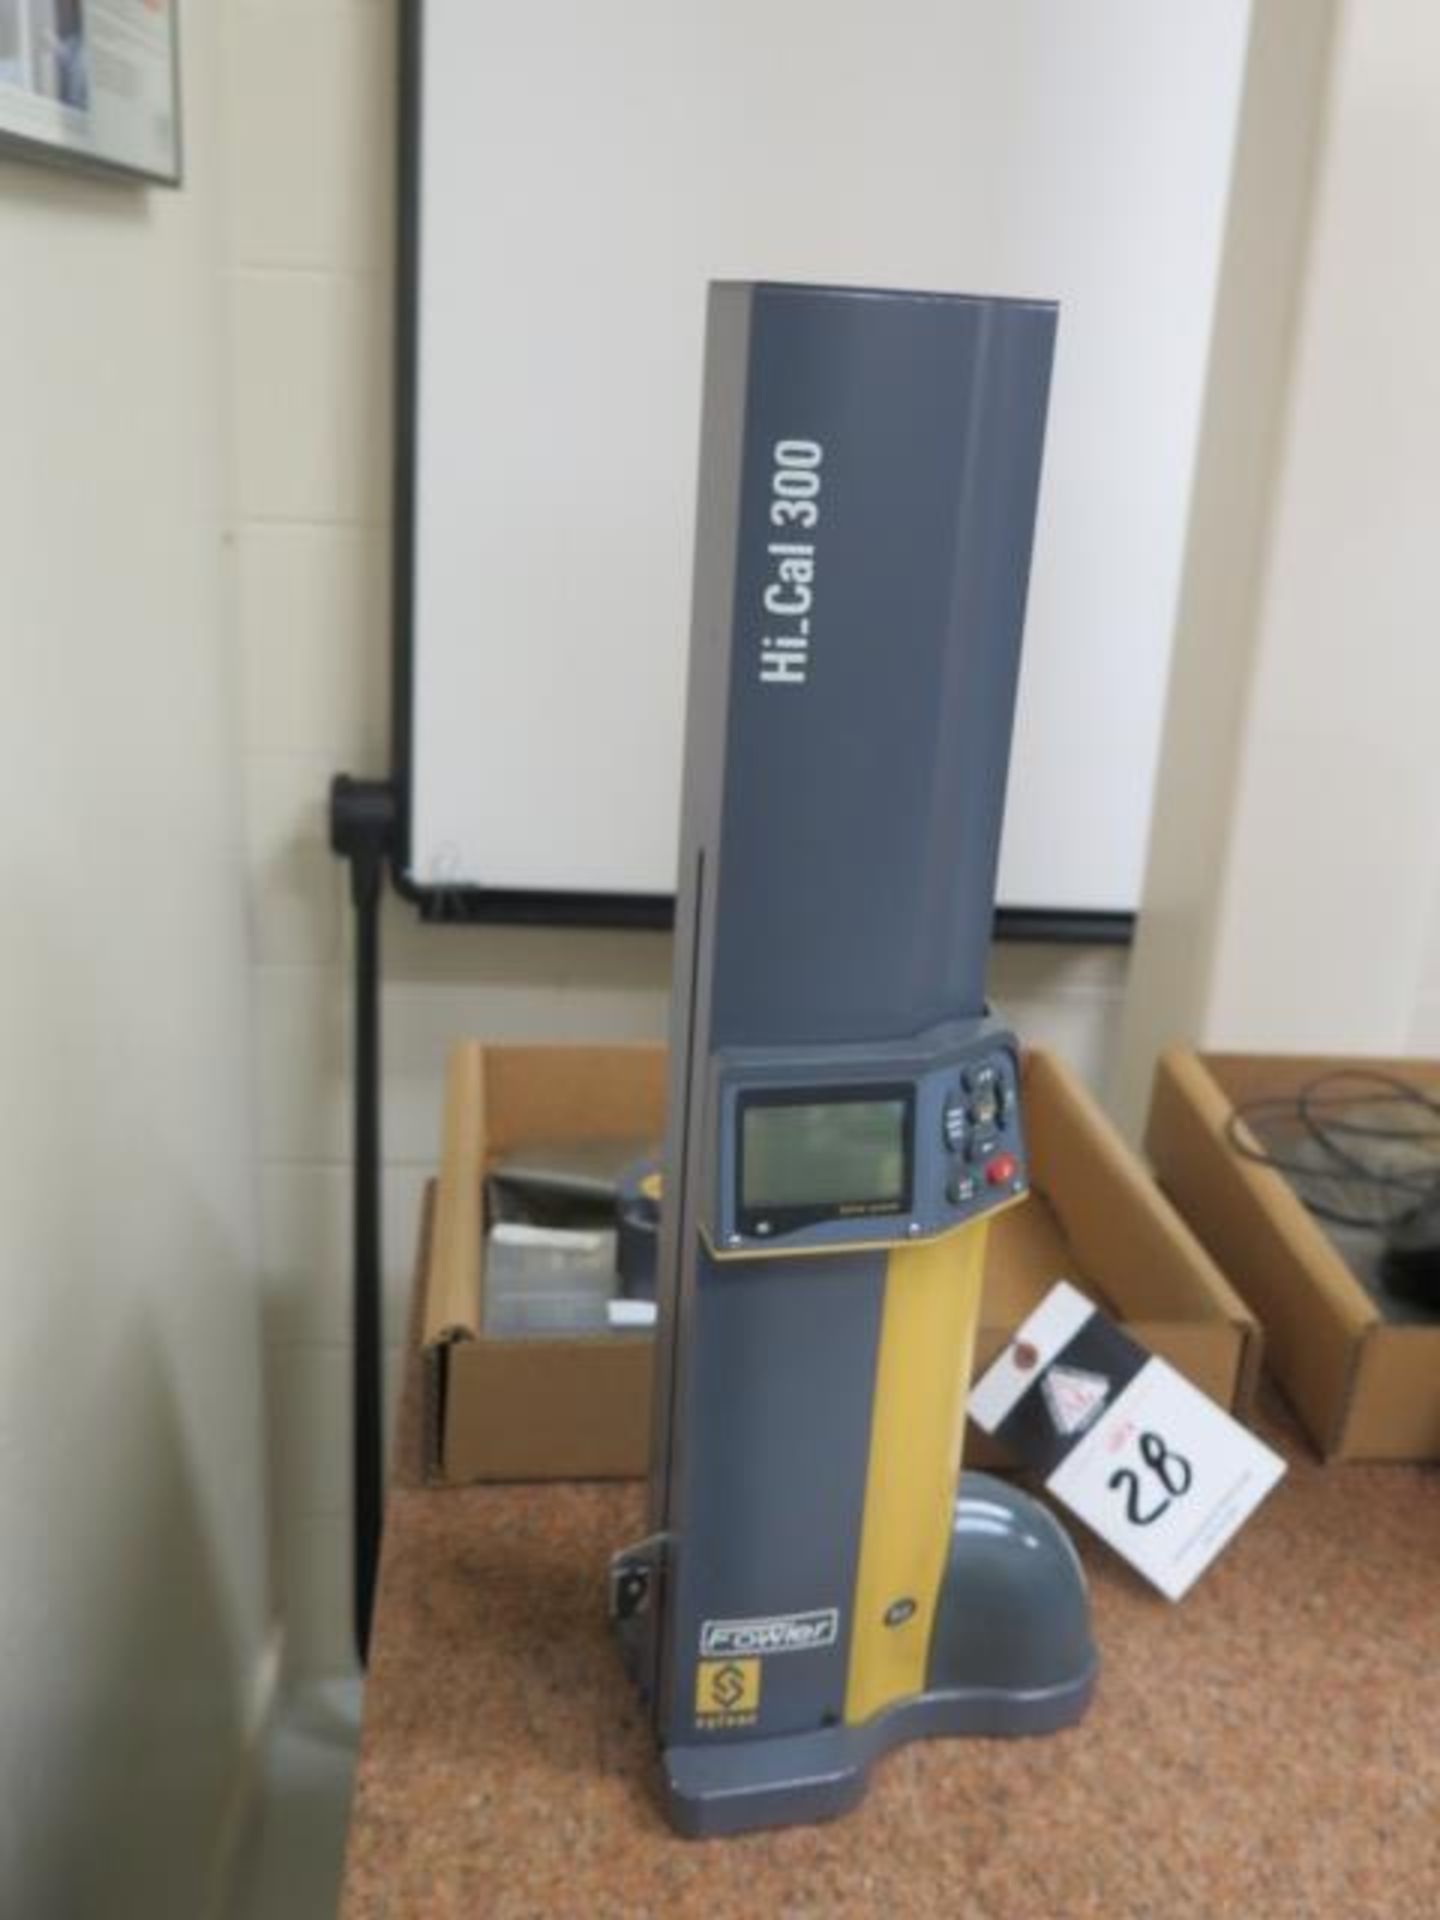 Fowler Sylvac Hi_CAL 300 12” Digital Height Gage w/ Access (SOLD AS-IS - NO WARRANTY) - Image 2 of 8